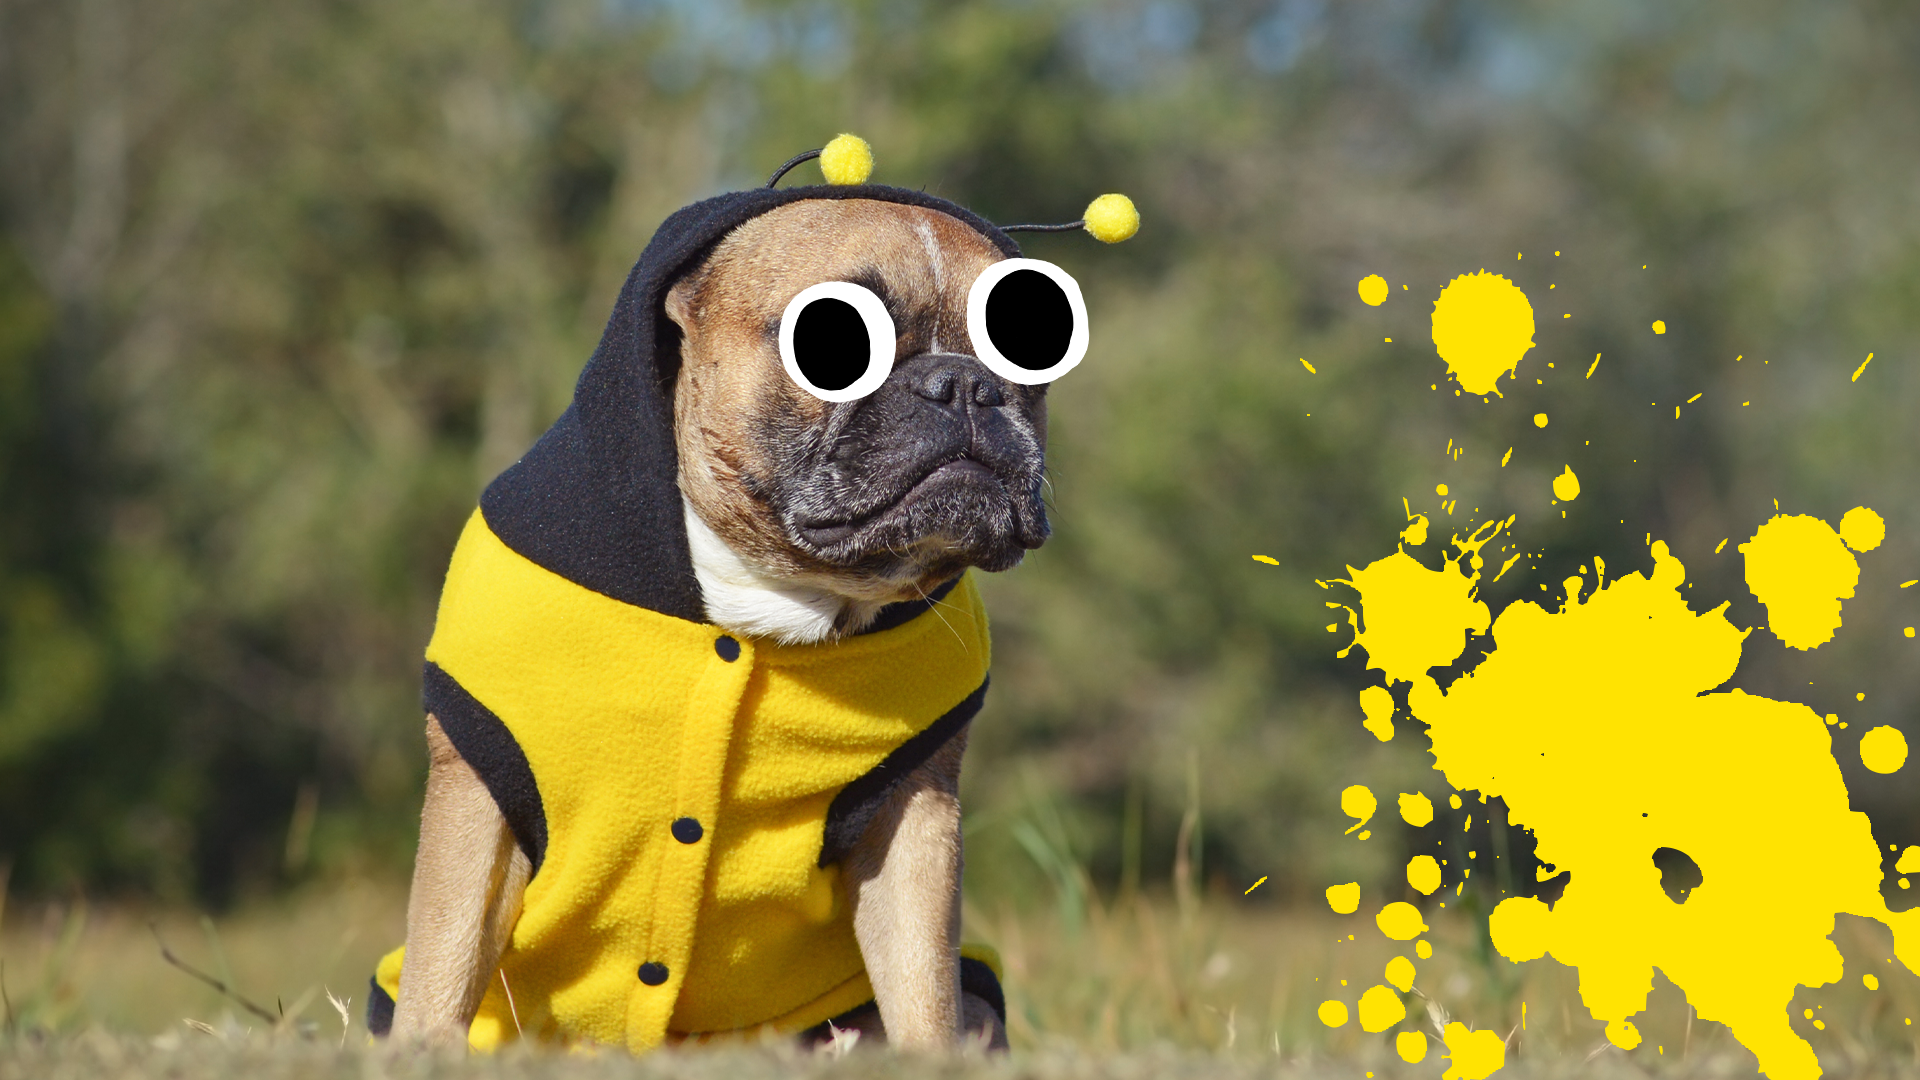 Dog in bee costume on grass with yellow splat 